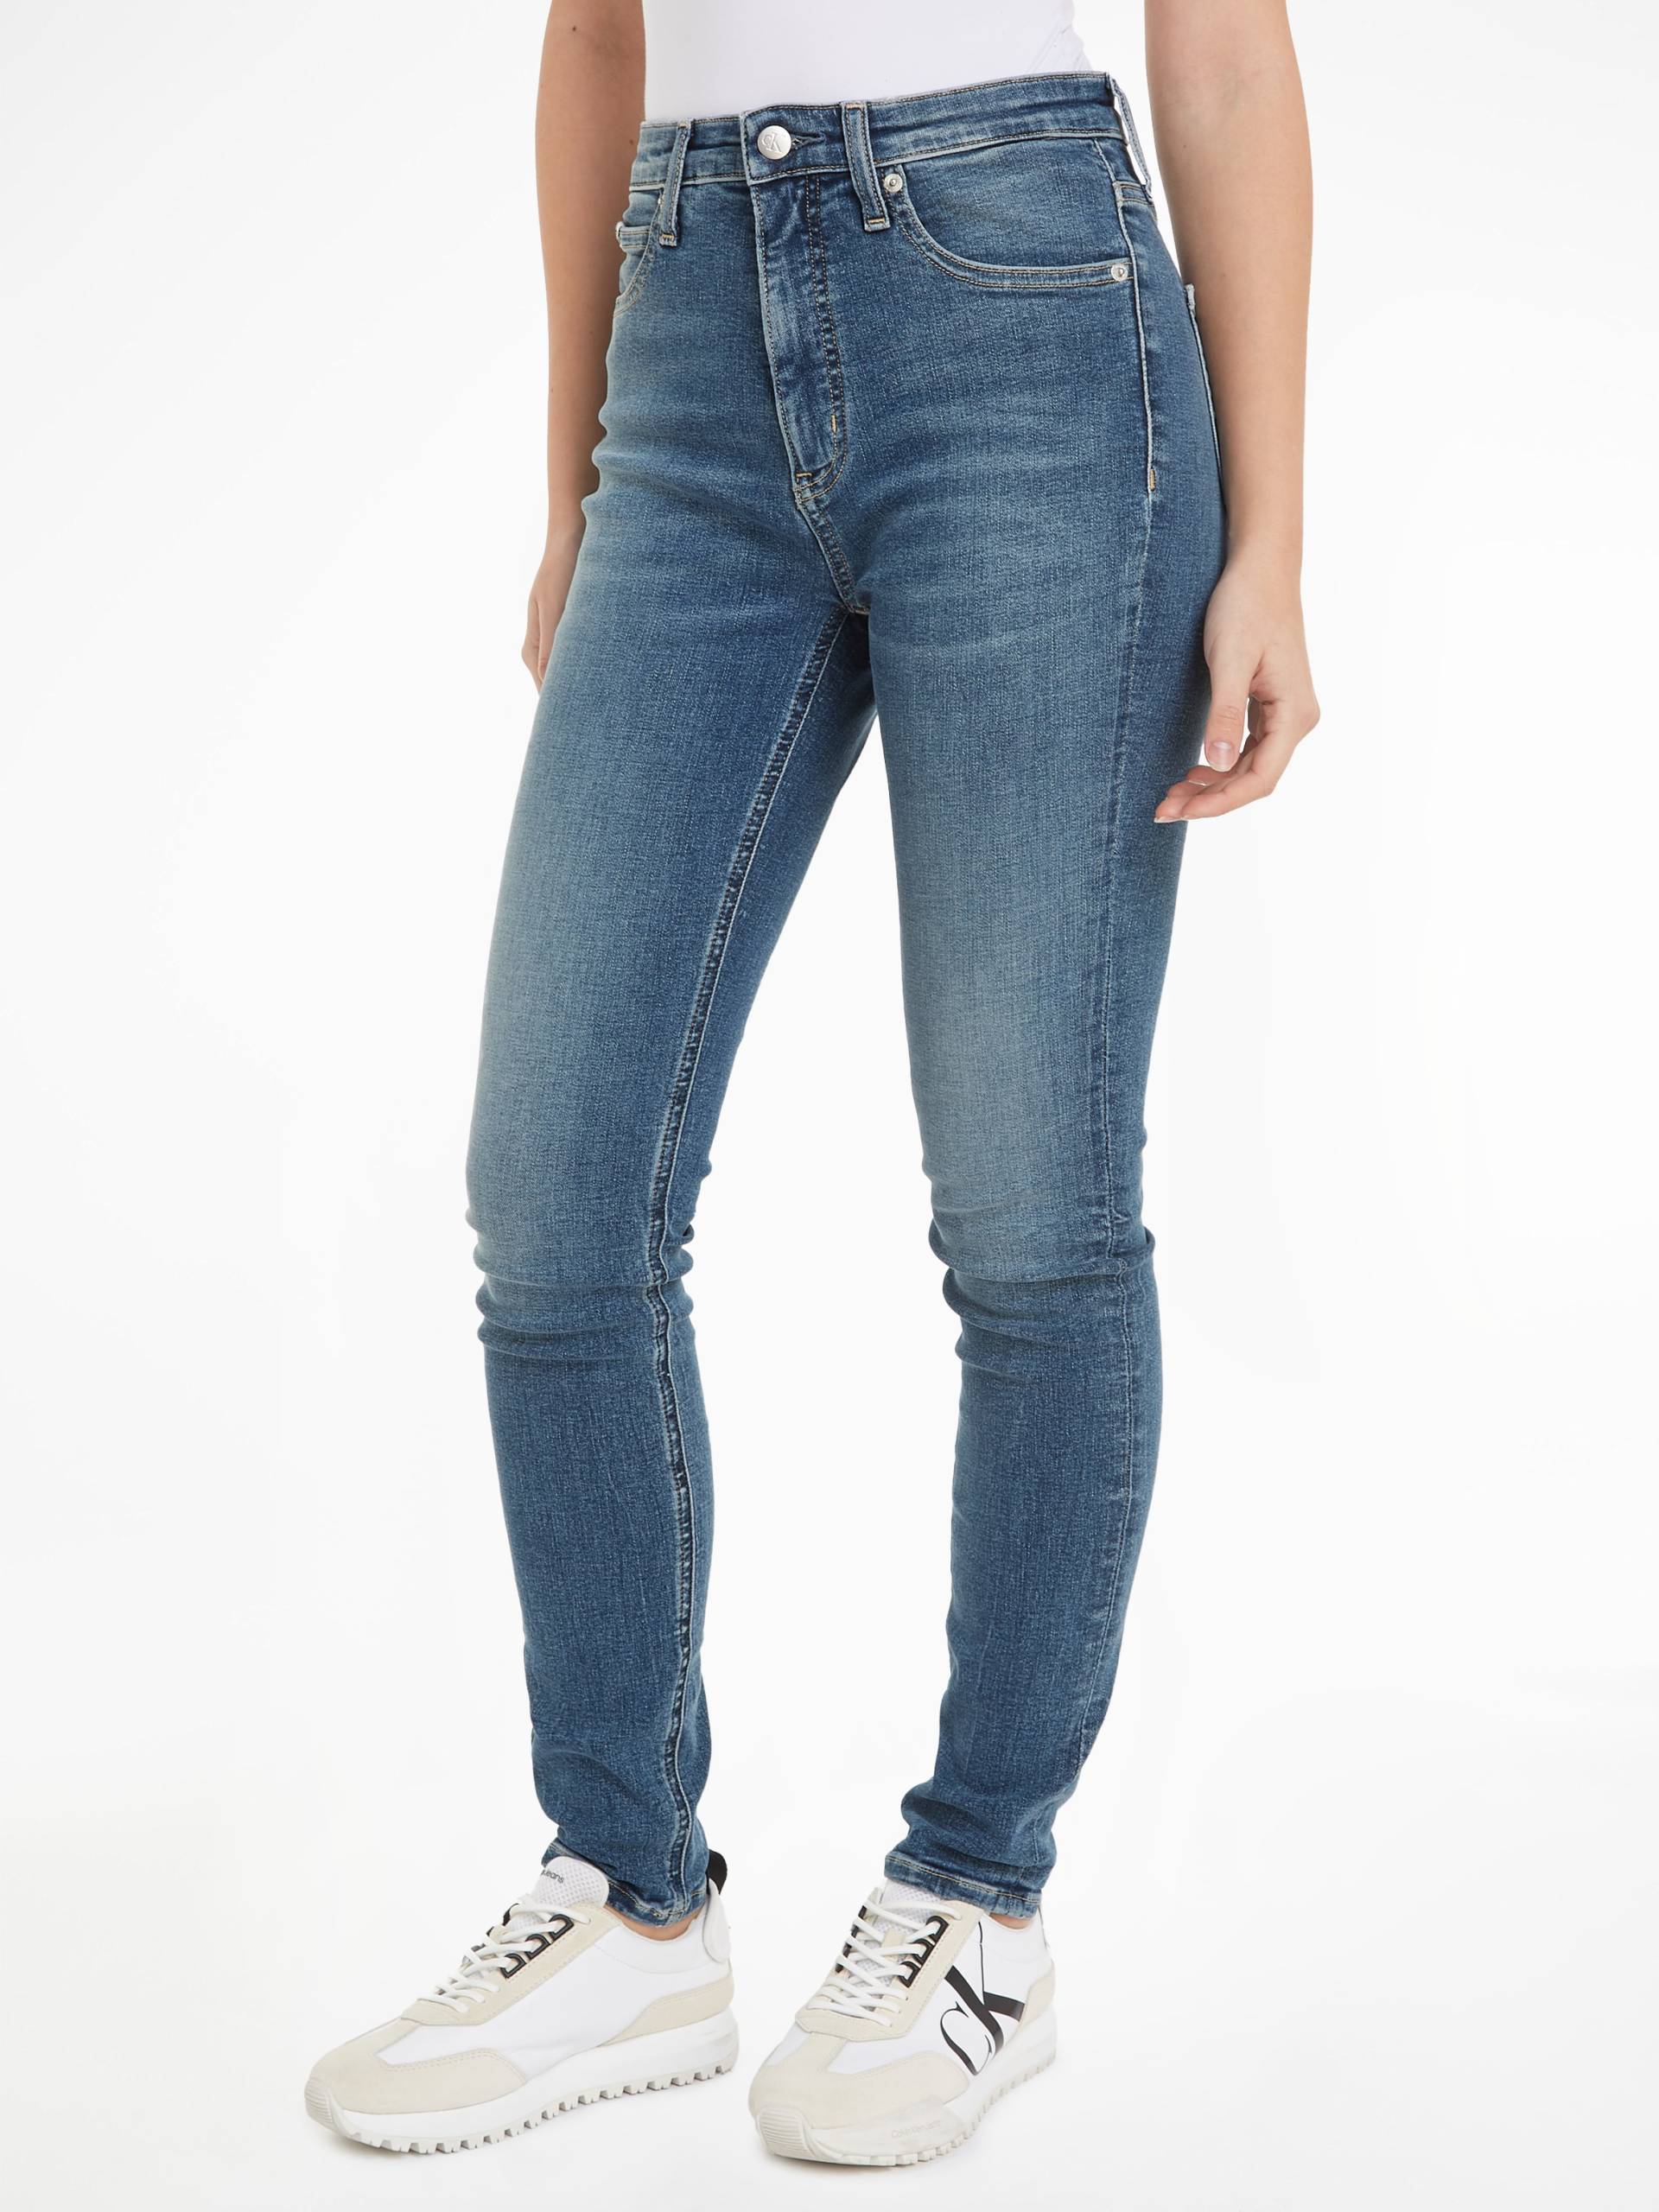 Calvin Klein Jeans Skinny-fit-Jeans »HIGH RISE SKINNY«, im 5-Pocket-Style von Calvin Klein Jeans